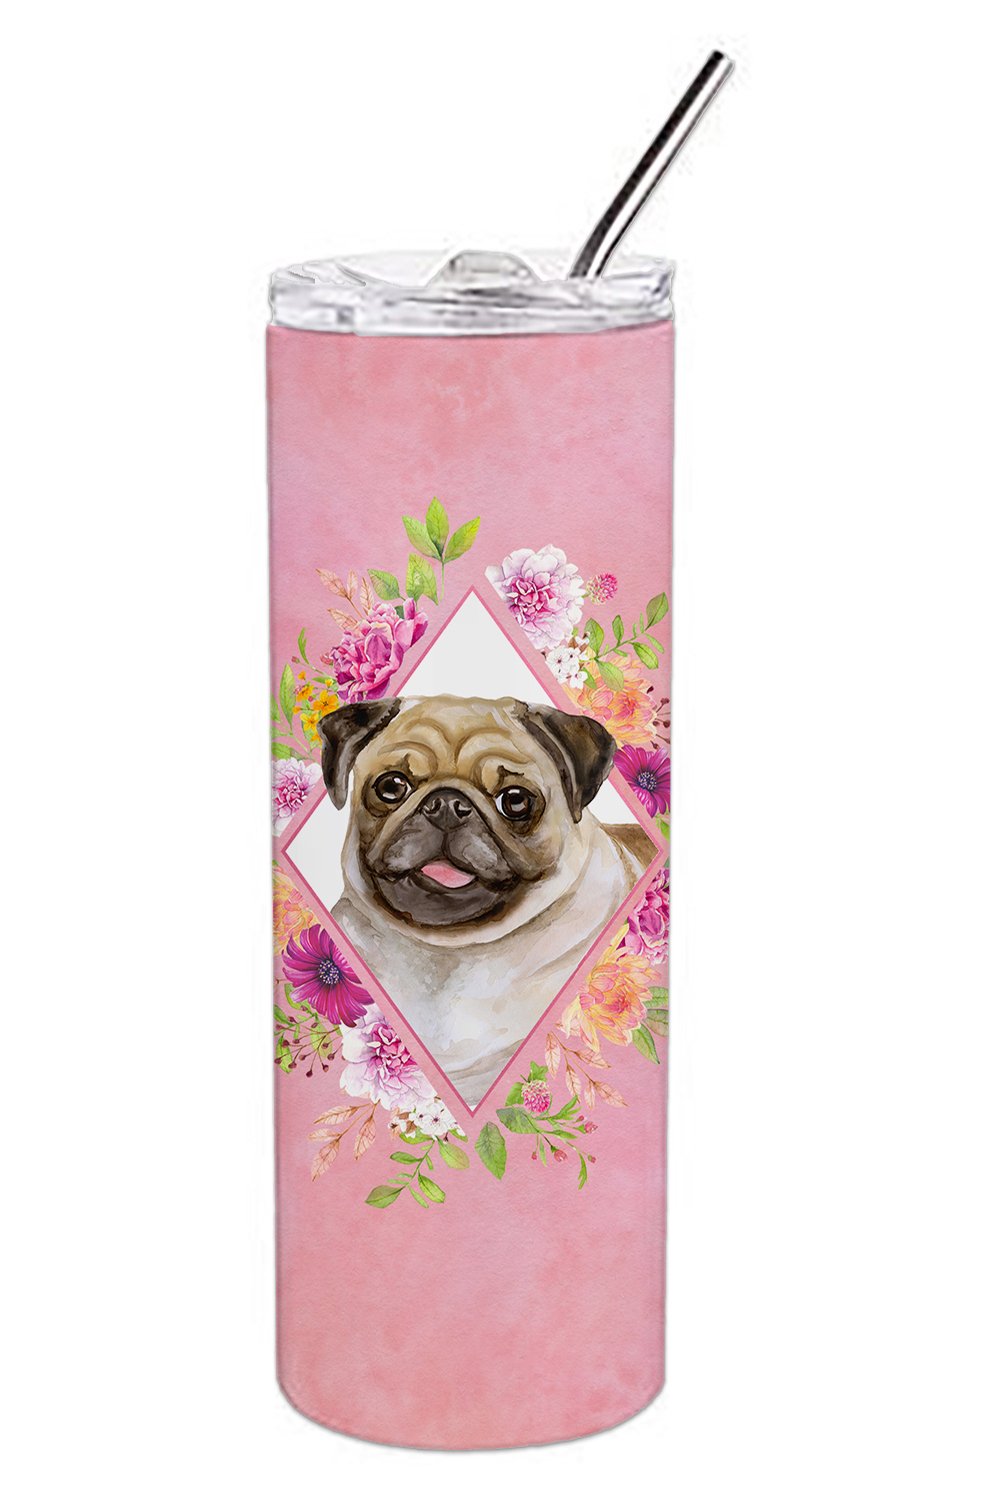 Fawn Pug Pink Flowers Double Walled Stainless Steel 20 oz Skinny Tumbler CK4174TBL20 by Caroline's Treasures